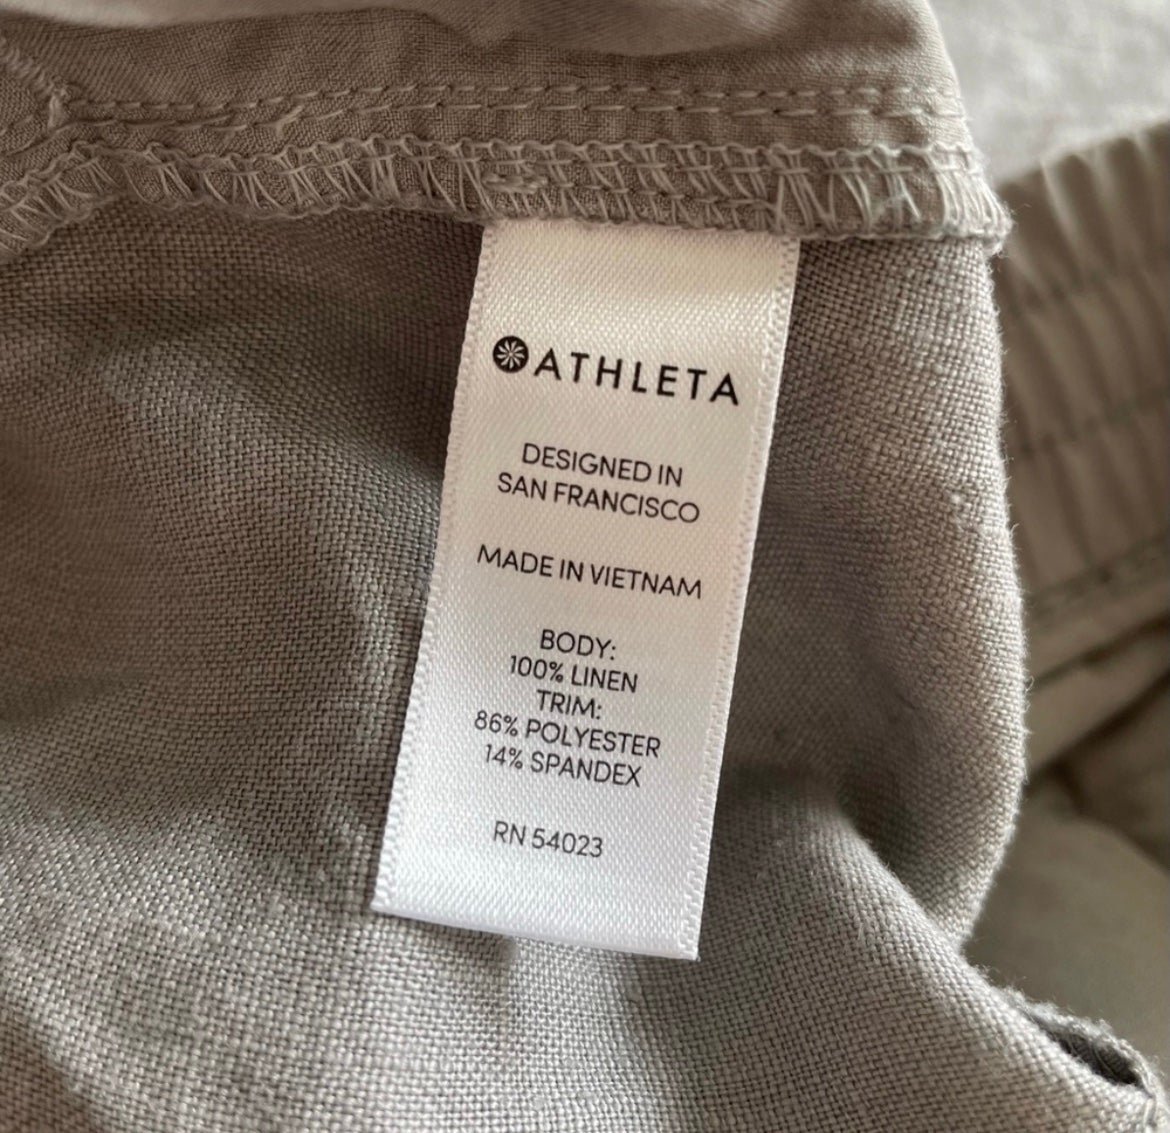 high discount Athleta Gray Bali Linen Mid Rise Tapered Ankle Pant #175799 EUC Size 6 fJCKFSTVX outlet online shop